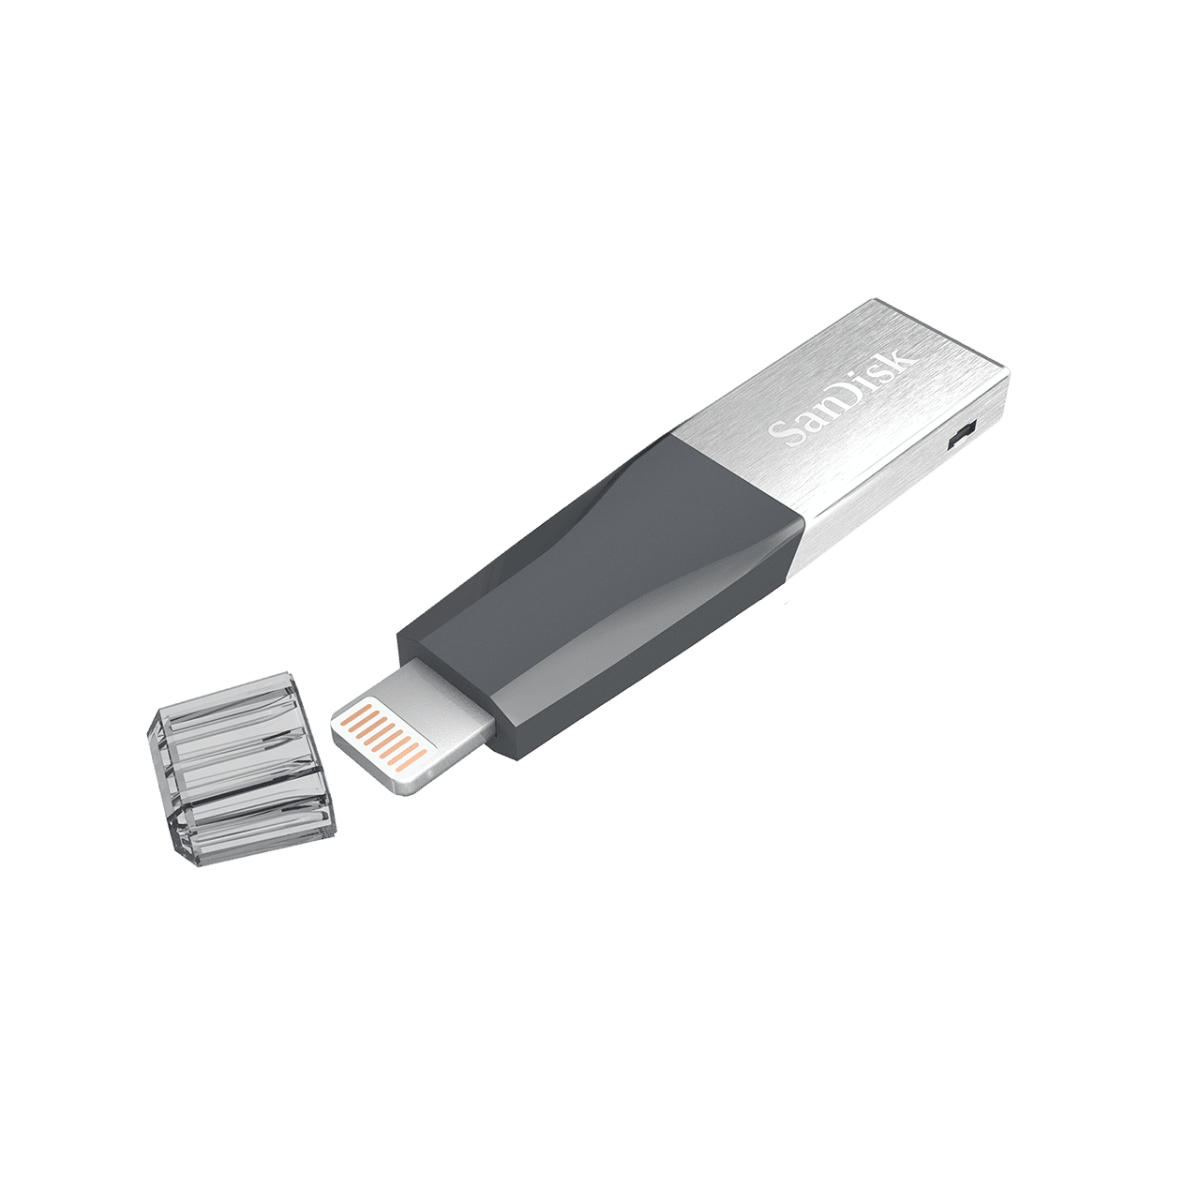 Ixpand Mini Mini Nocap.png.thumb .1280.1280 Sandisk &Lt;Div Class=&Quot;Active&Quot; Data-Sku=&Quot;Sdix40N-032G-Gn6Nn&Quot;&Gt; &Lt;H1&Gt;Extra Storage For Your Iphone&Lt;A Class=&Quot;Disclosure&Quot; Tabindex=&Quot;0&Quot; Href=&Quot;Https://Shop.westerndigital.com/Products/Usb-Flash-Drives/Sandisk-Ixpand-Mini-Usb-3-0#Disclosures&Quot; Target=&Quot;_Self&Quot; Rel=&Quot;Noopener Noreferrer&Quot; Aria-Labelledby=&Quot;Disclosures&Quot;&Gt;&Lt;Sup&Gt;1&Lt;/Sup&Gt;&Lt;/A&Gt;&Lt;/H1&Gt; &Lt;Div Class=&Quot;Inheritpara Mb-4&Quot;&Gt; Designed To Be The Perfect Companion For Your Iphone, The Ixpand™ Mini Flash Drive Offers An Easy Way To Free Up Space On Your Iphone, Automatically Backs Up Your Camera Roll, And Even Lets You Watch Popular-Format Videos Straight From The Drive&Lt;A Class=&Quot;Disclosure&Quot; Tabindex=&Quot;0&Quot; Href=&Quot;Https://Shop.westerndigital.com/Products/Usb-Flash-Drives/Sandisk-Ixpand-Mini-Usb-3-0#Disclosures&Quot; Target=&Quot;_Self&Quot; Rel=&Quot;Noopener Noreferrer&Quot; Aria-Labelledby=&Quot;Disclosures&Quot;&Gt;&Lt;Sup&Gt;5&Lt;/Sup&Gt;&Lt;/A&Gt;. The Drive Has Both A Lightning Connector That Works With Most Cases And A Usb 3.0 Connector To Plug Into Your Pc Or Mac Computer So You Can Easily Move Your Content. The Ixpand Mini Flash Drive Also Includes Software That Lets You Password-Protect Files, So You Can Share Your Content While Keeping Sensitive Files Secure Across Your Devices&Lt;A Class=&Quot;Disclosure&Quot; Tabindex=&Quot;0&Quot; Href=&Quot;Https://Shop.westerndigital.com/Products/Usb-Flash-Drives/Sandisk-Ixpand-Mini-Usb-3-0#Disclosures&Quot; Target=&Quot;_Self&Quot; Rel=&Quot;Noopener Noreferrer&Quot; Aria-Labelledby=&Quot;Disclosures&Quot;&Gt;&Lt;Sup&Gt;6&Lt;/Sup&Gt;&Lt;/A&Gt; Take All The Photos And Videos You Want—The Ixpand Mini Flash Drive Delivers A Fast And Simple Way To Free Up Space On Your Iphone So That You’re Always Ready To Capture More Memories. &Lt;Div Class=&Quot;Active&Quot; Data-Sku=&Quot;Sdix40N-032G-Gn6Nn&Quot;&Gt; &Lt;Div Class=&Quot;Inheritpara Mb-4&Quot;&Gt;2-Year Limited Manufacturer Warranty&Lt;/Div&Gt; &Lt;Div&Gt;&Lt;/Div&Gt; &Lt;/Div&Gt; Https://Youtu.be/Rfd4Gt7H-Iy &Lt;/Div&Gt; &Lt;/Div&Gt; Sandisk The Ixpand Mini Flash Drive For Your Iphone (32Gb) Sandisk Usb Flash